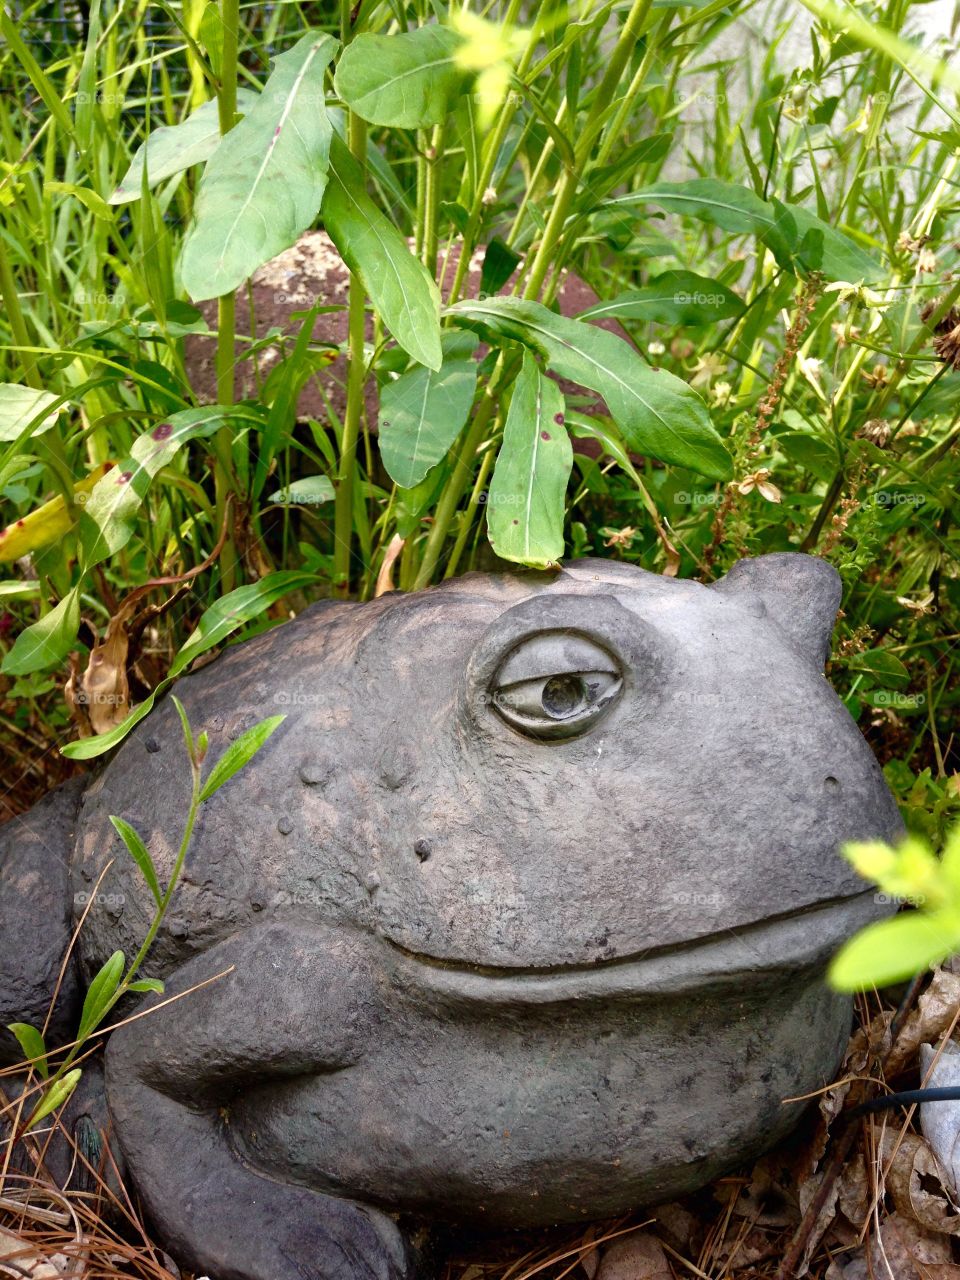 Odd Frog Statue in My Garden. I have this odd frog statue that's always been in my garden.